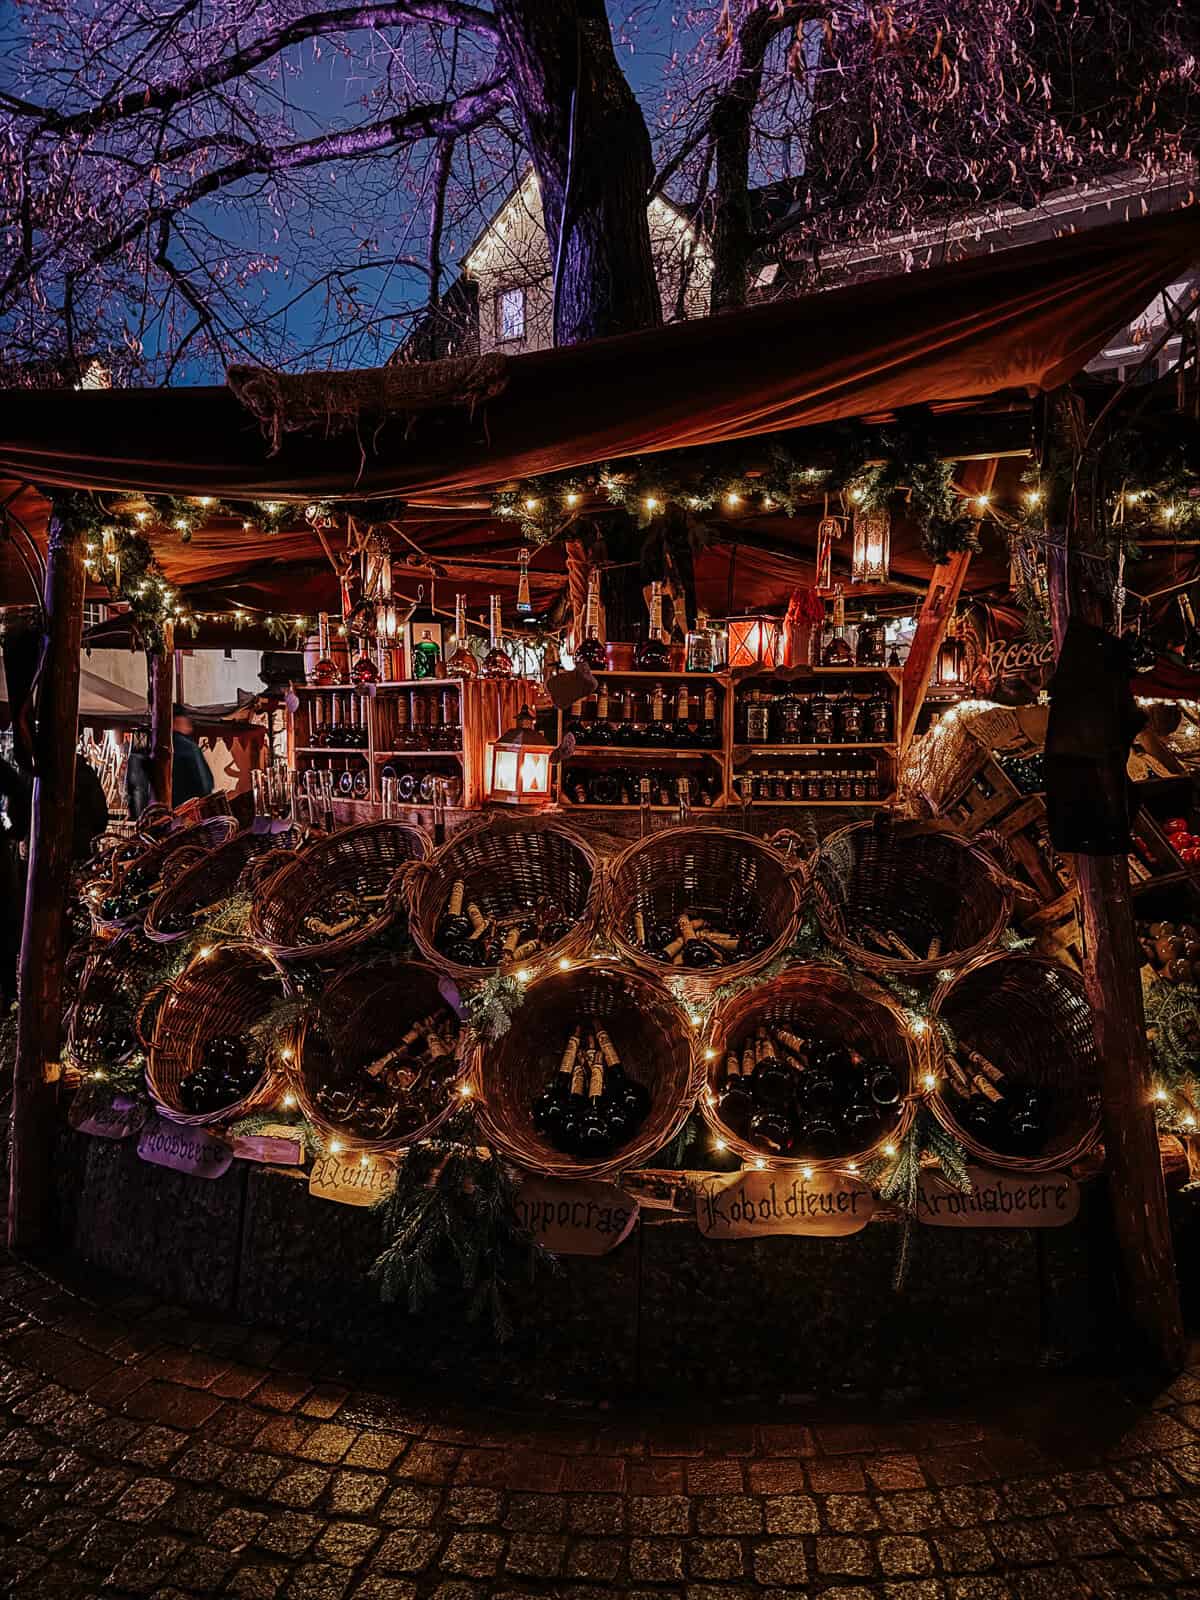 a nighttime view of a market booth beautifully illuminated with lights and decorated with Christmas greens and rustic elements.